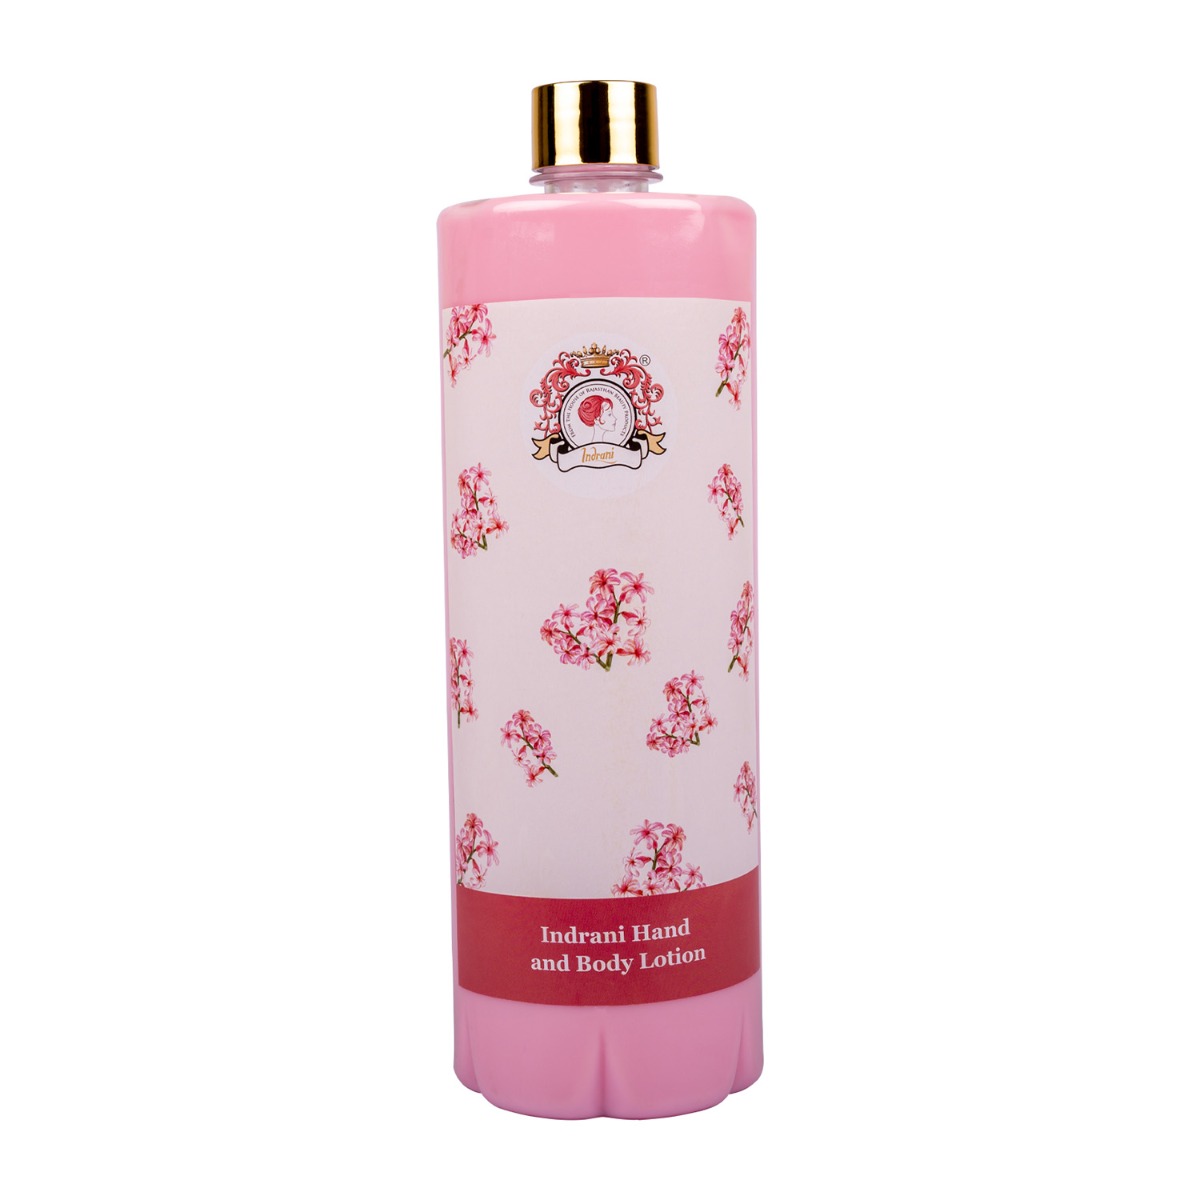 Indrani Hand And Body Lotion, 1ltr